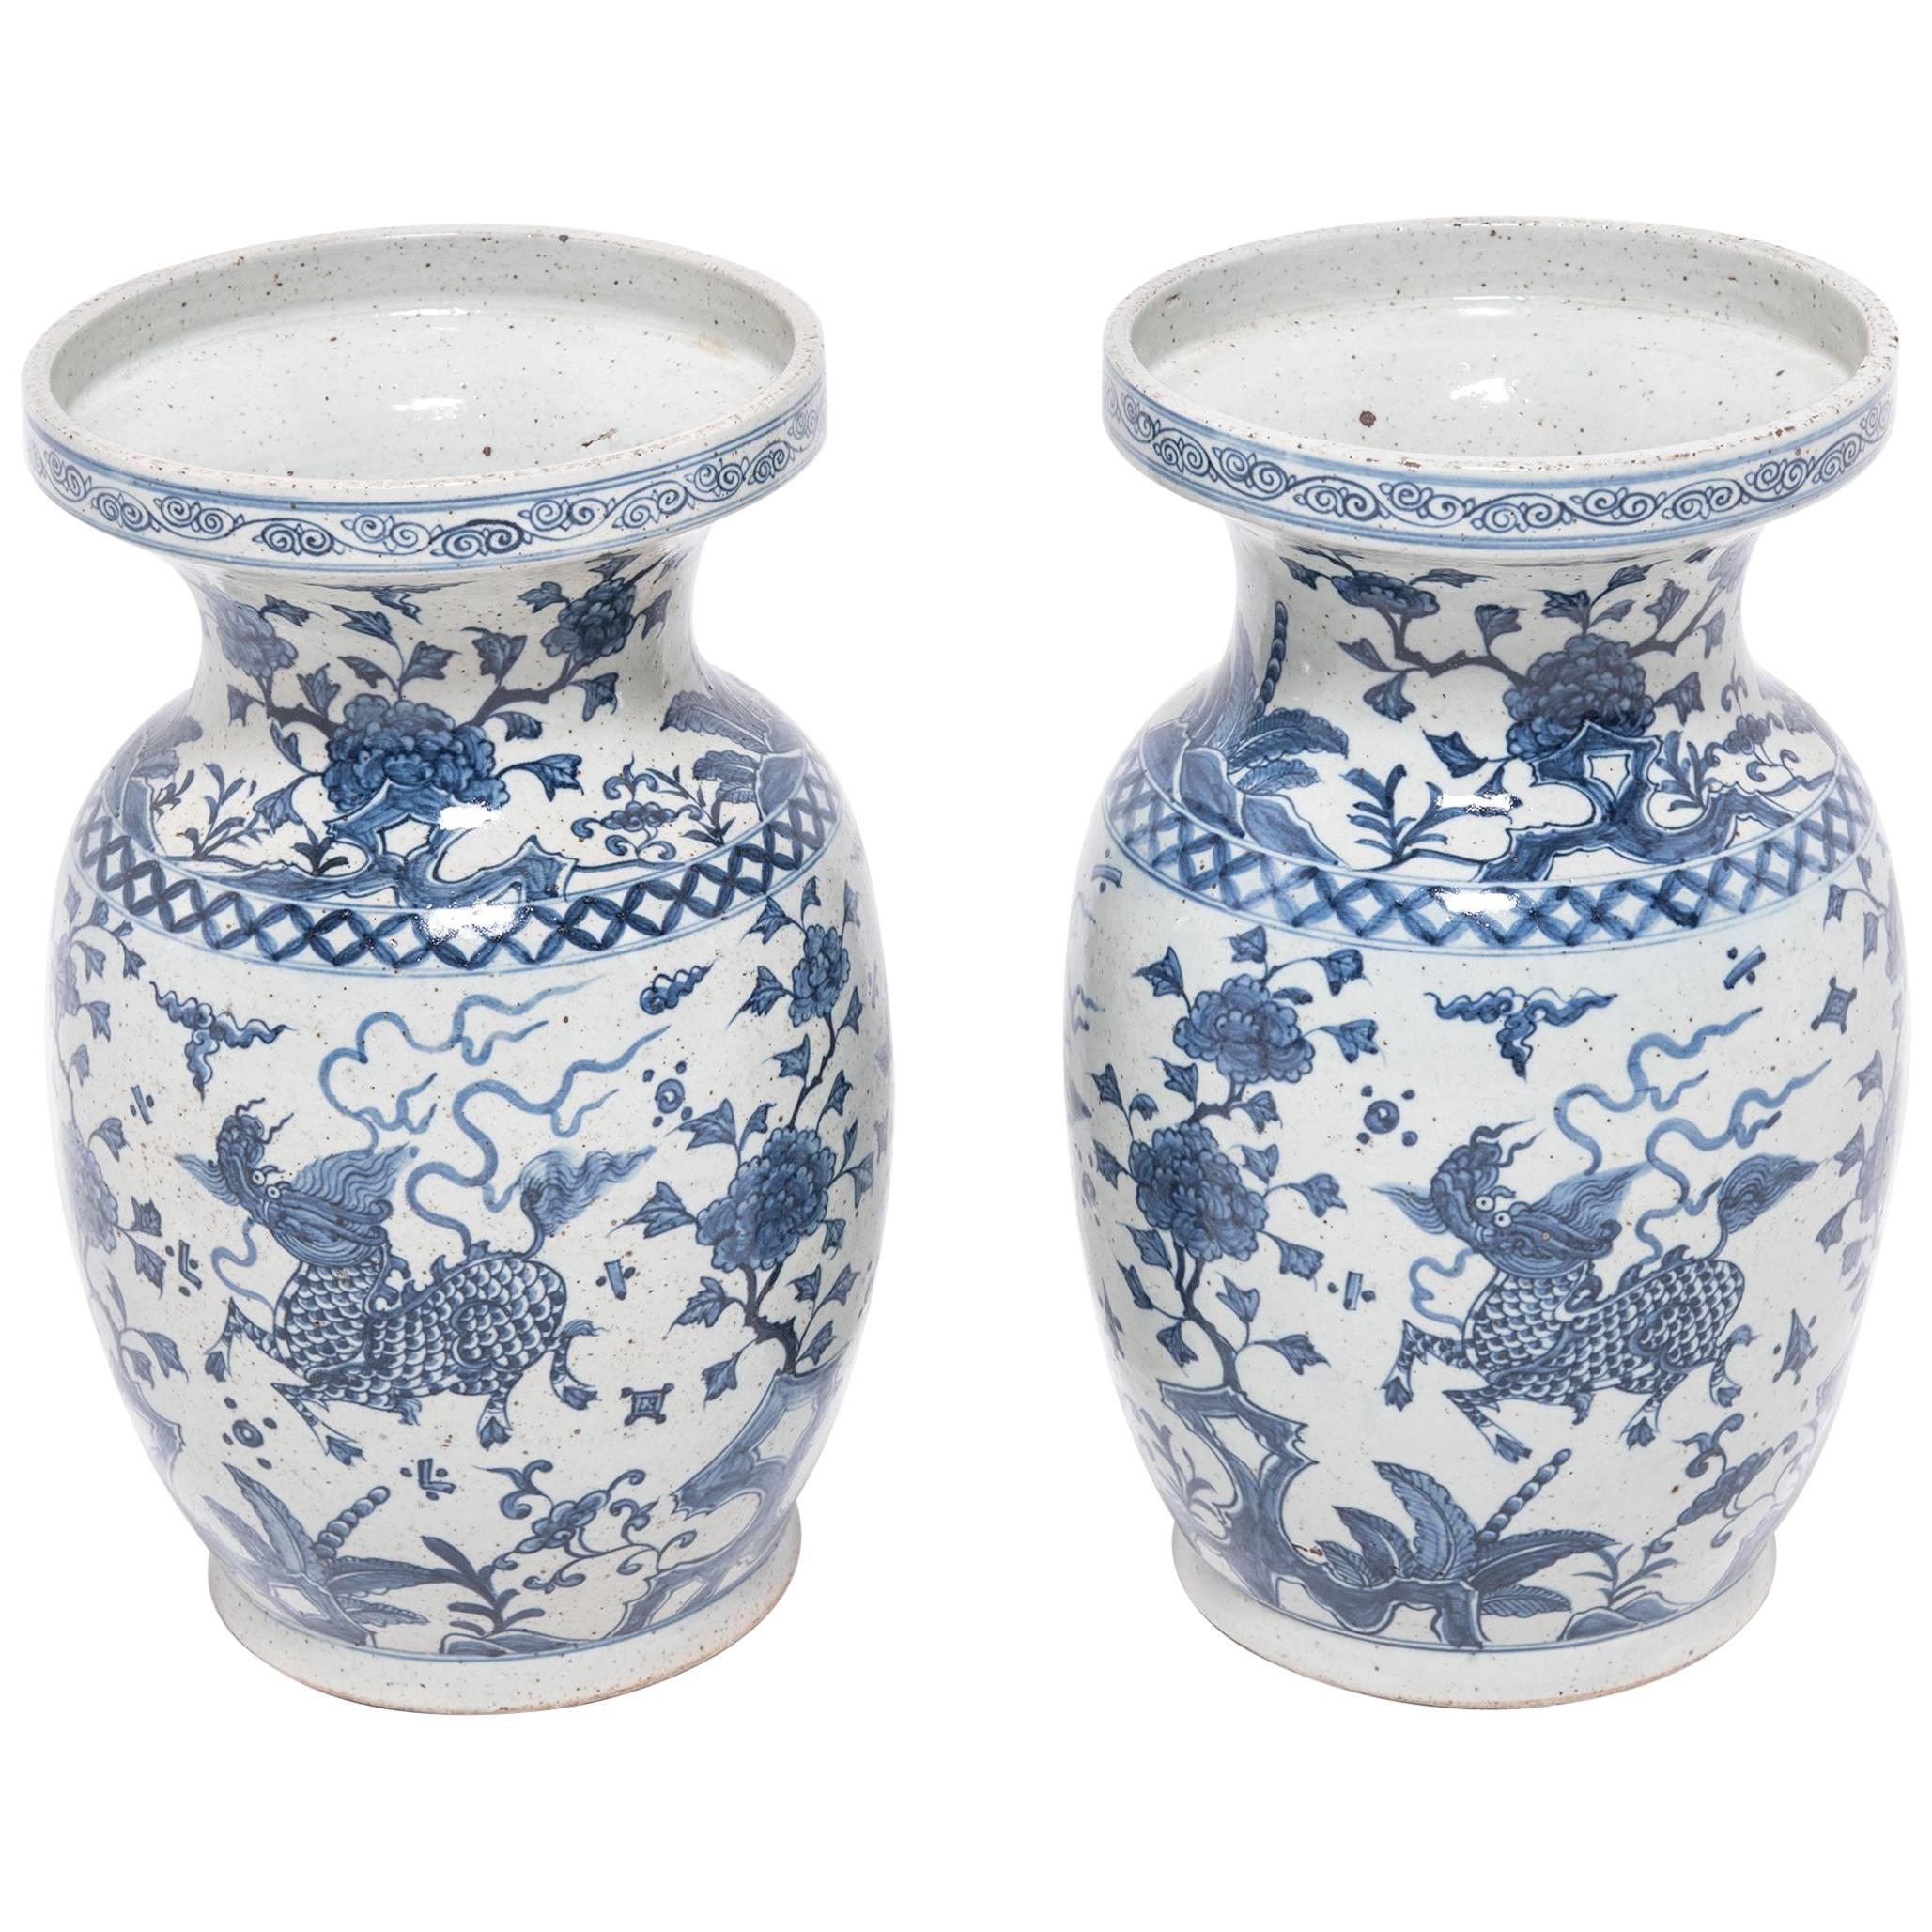 Pair of Chinese Blue and White Qilin Vases, c. 1900